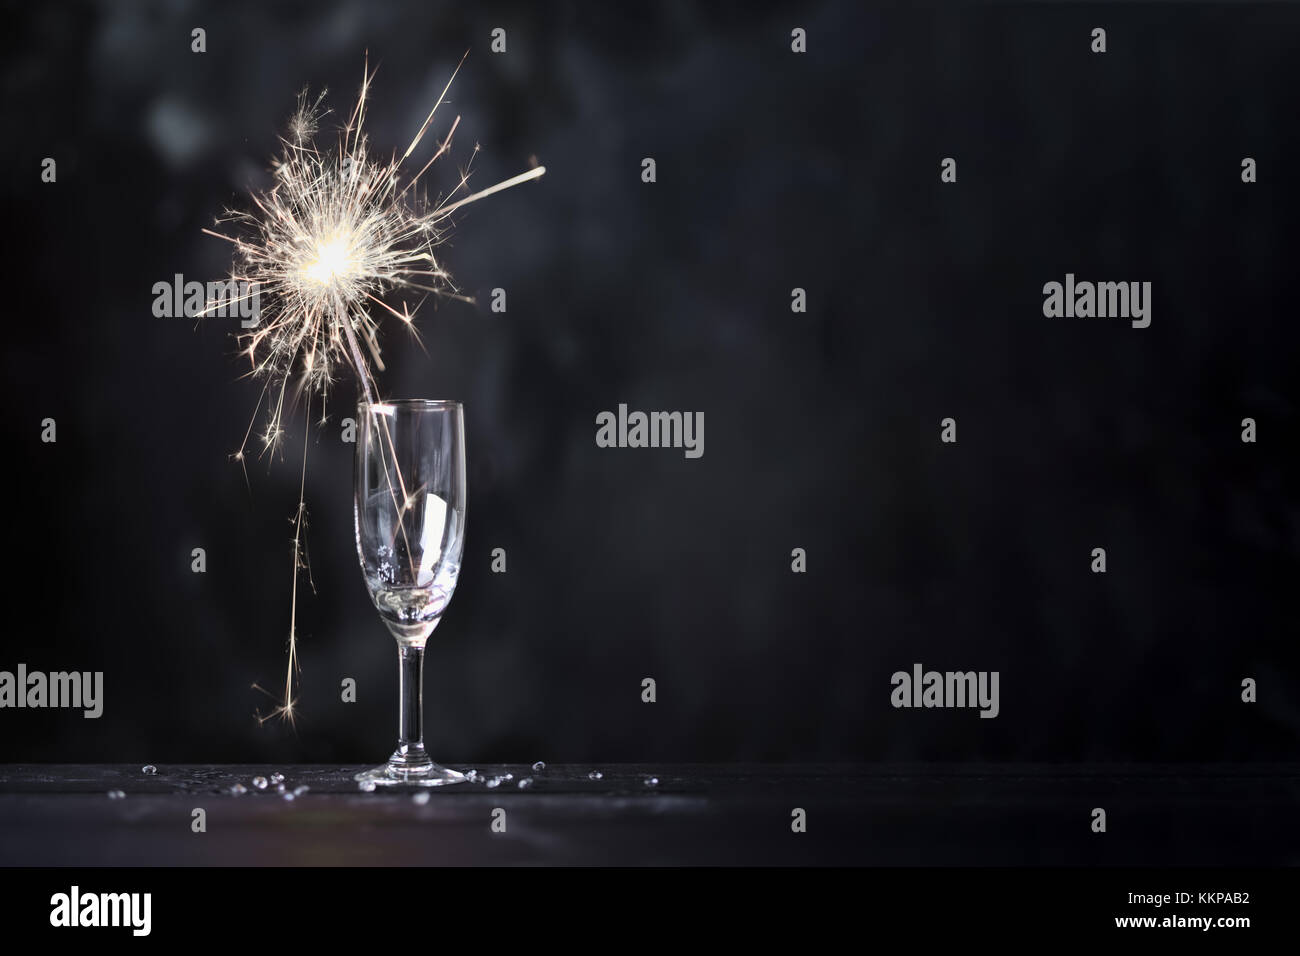 Champagne glass with lit sparkler against a dark background Stock Photo